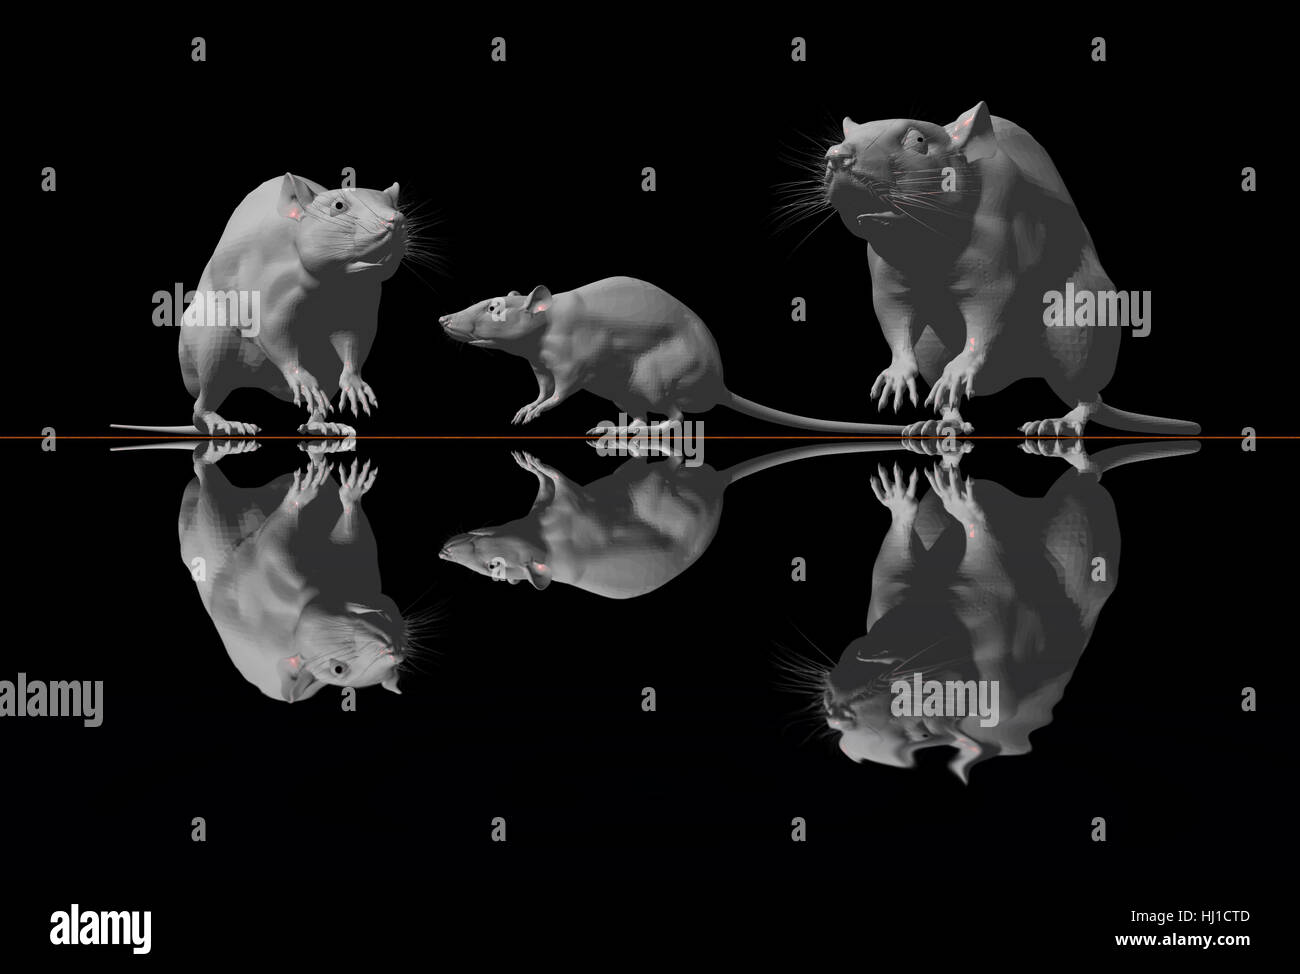 graphic, mirroring, three, mouse, mice, rat, rats, graphic, black, swarthy, Stock Photo